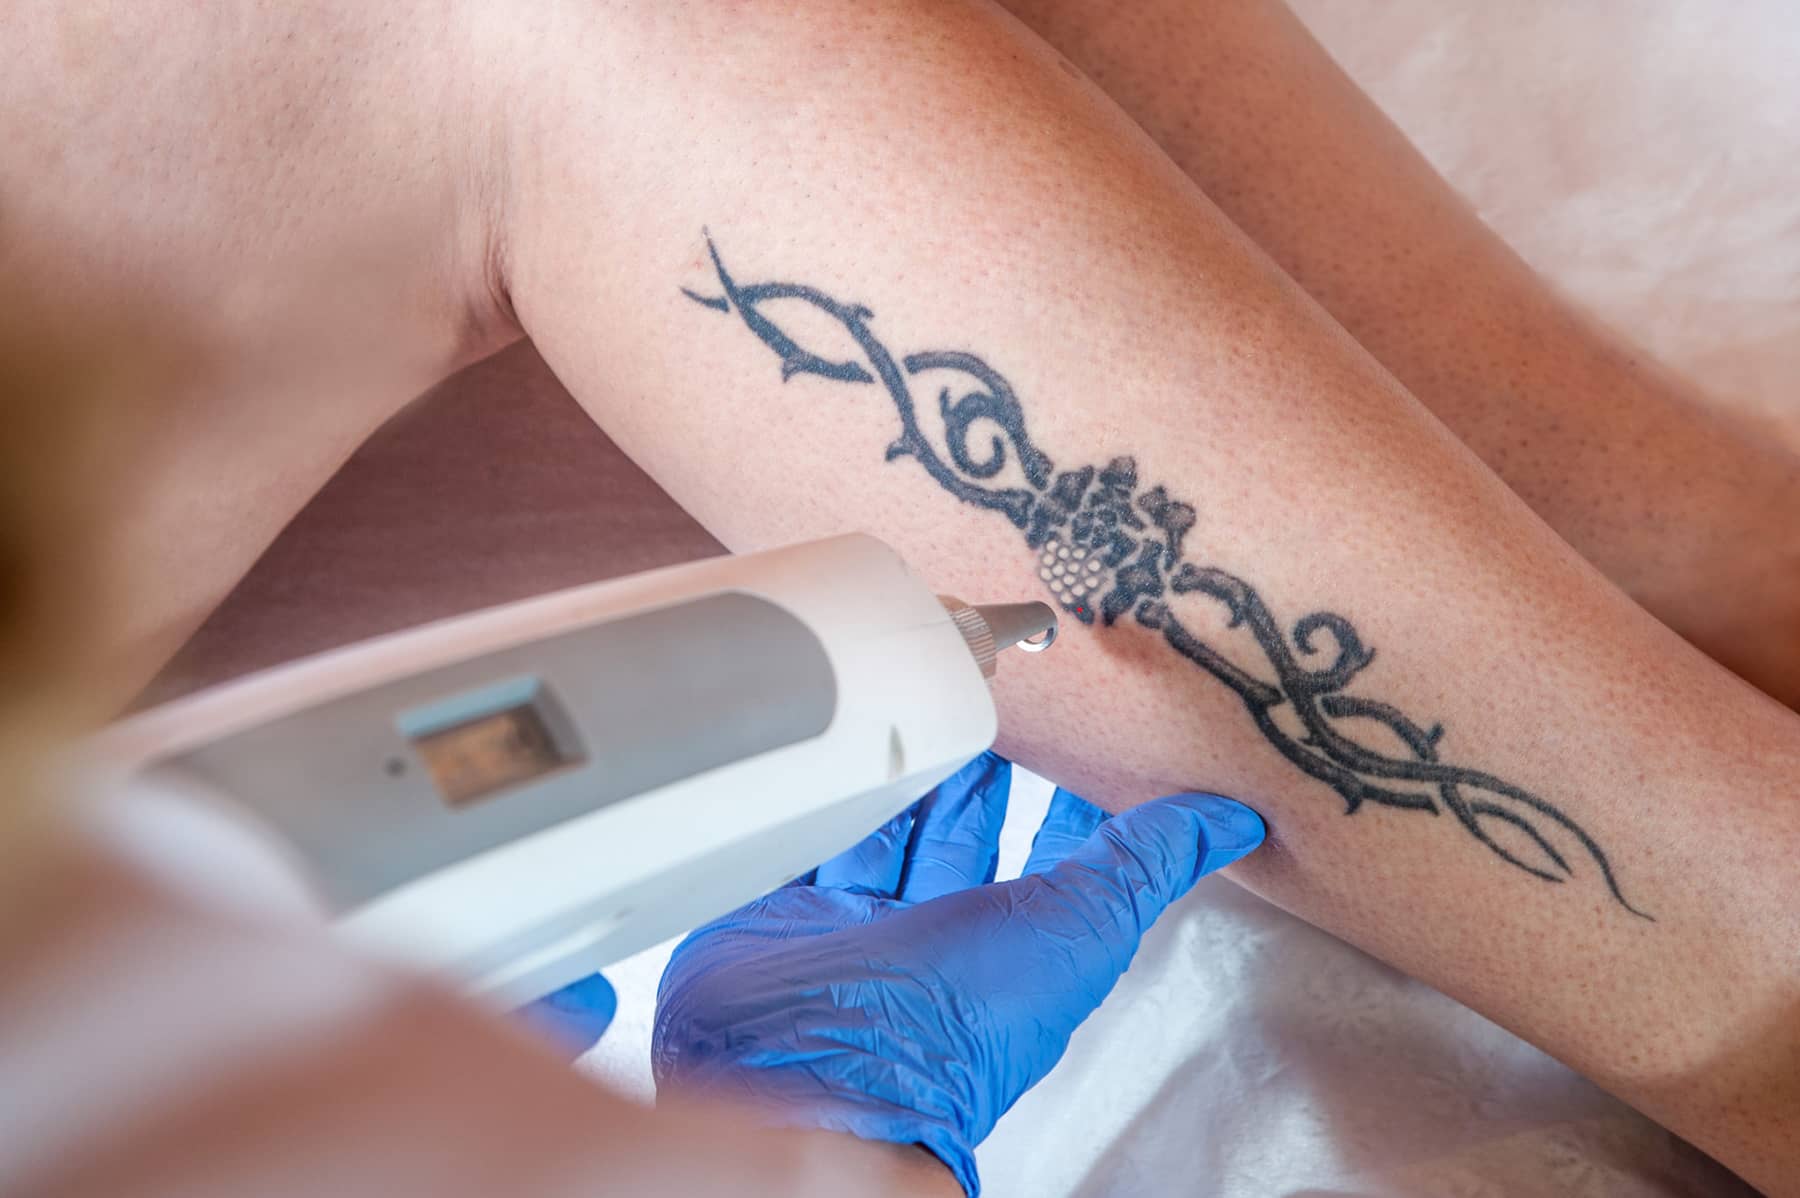 Laser Tattoo Removal - Remove Unwanted Tattoos | LaserSpa of Tampa Bay